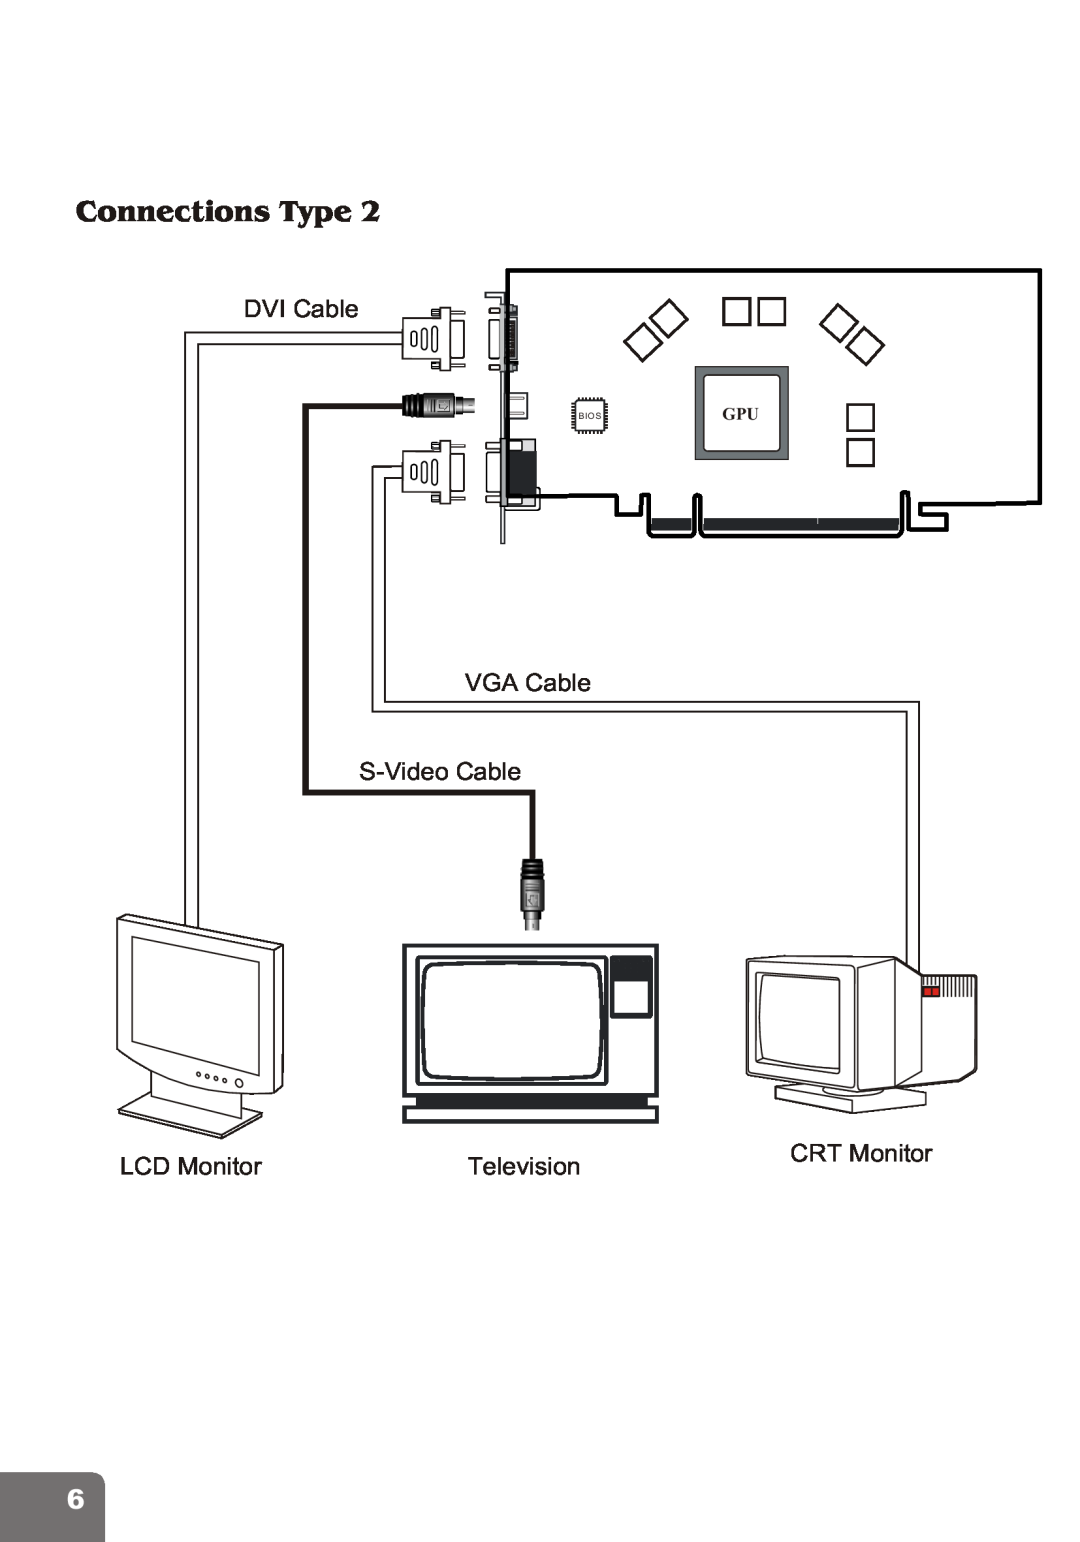 Nvidia PCI Express Series Connections Type, DVI Cable, VGA Cable S-Video Cable, LCD Monitor, Television, CRT Monitor, Bios 